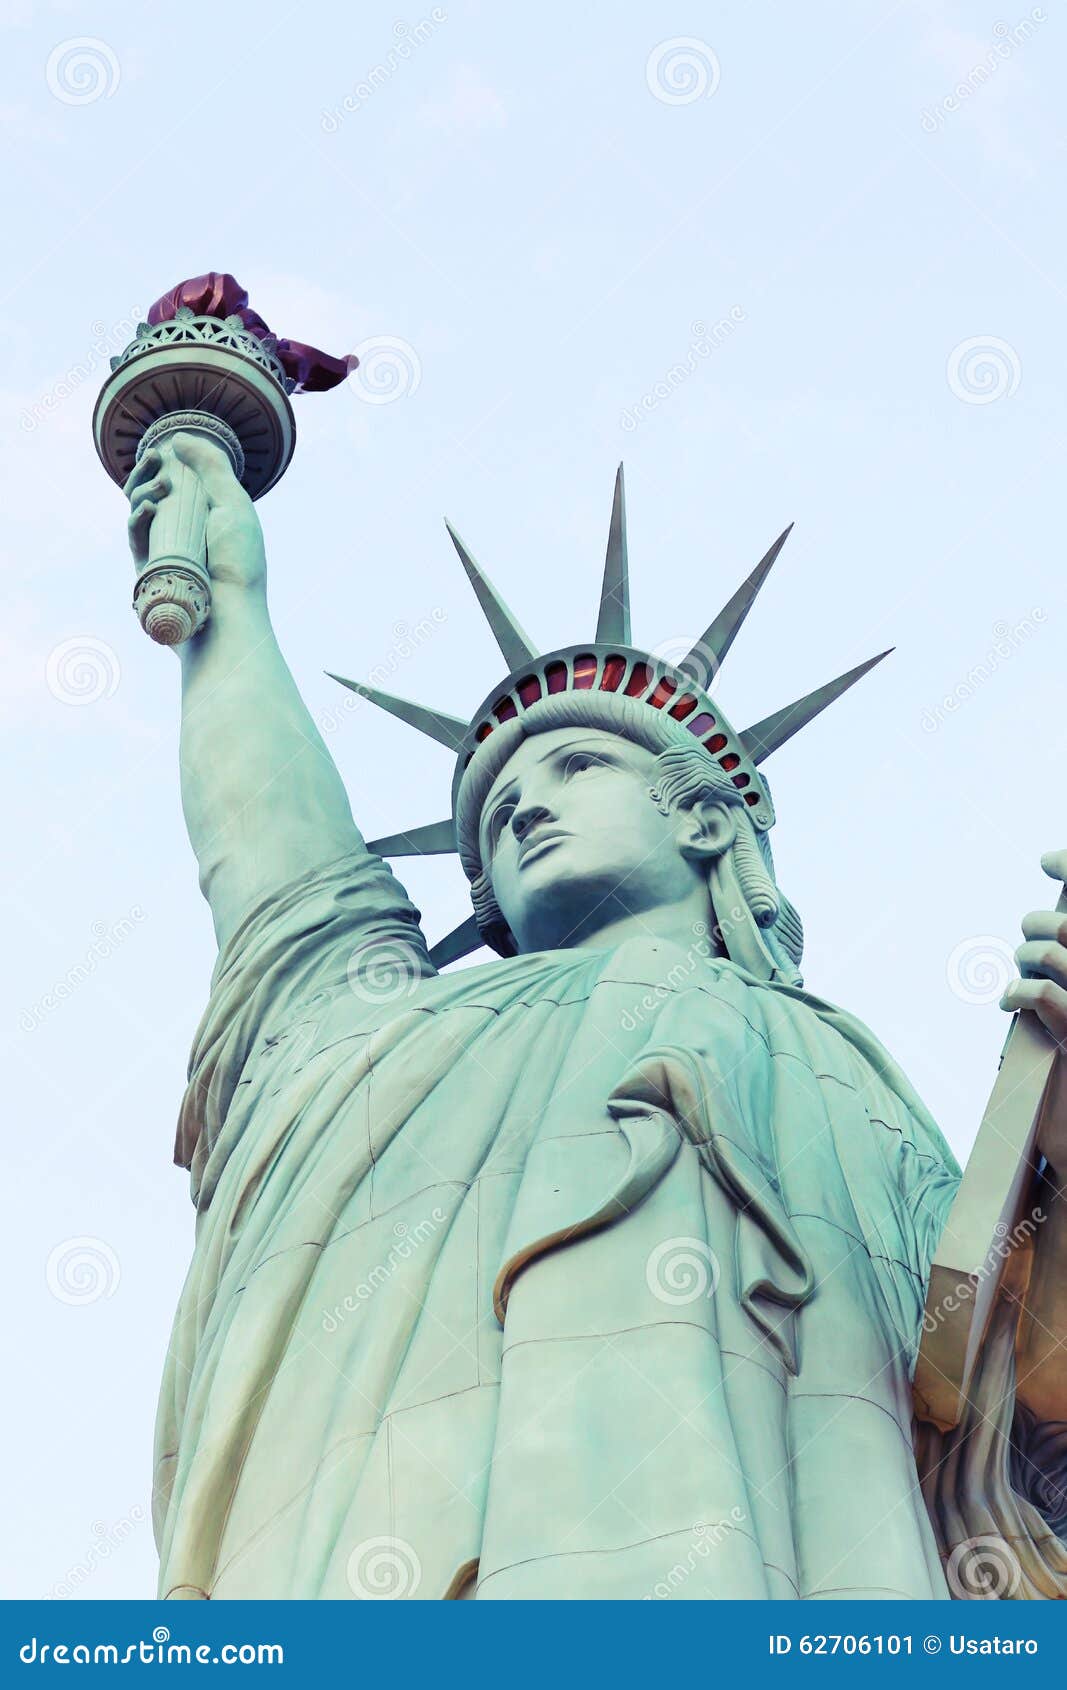 the statue of liberty is a colossal copper statue ed by auguste bartholdi a french sculptor was built by gustave eiffel 